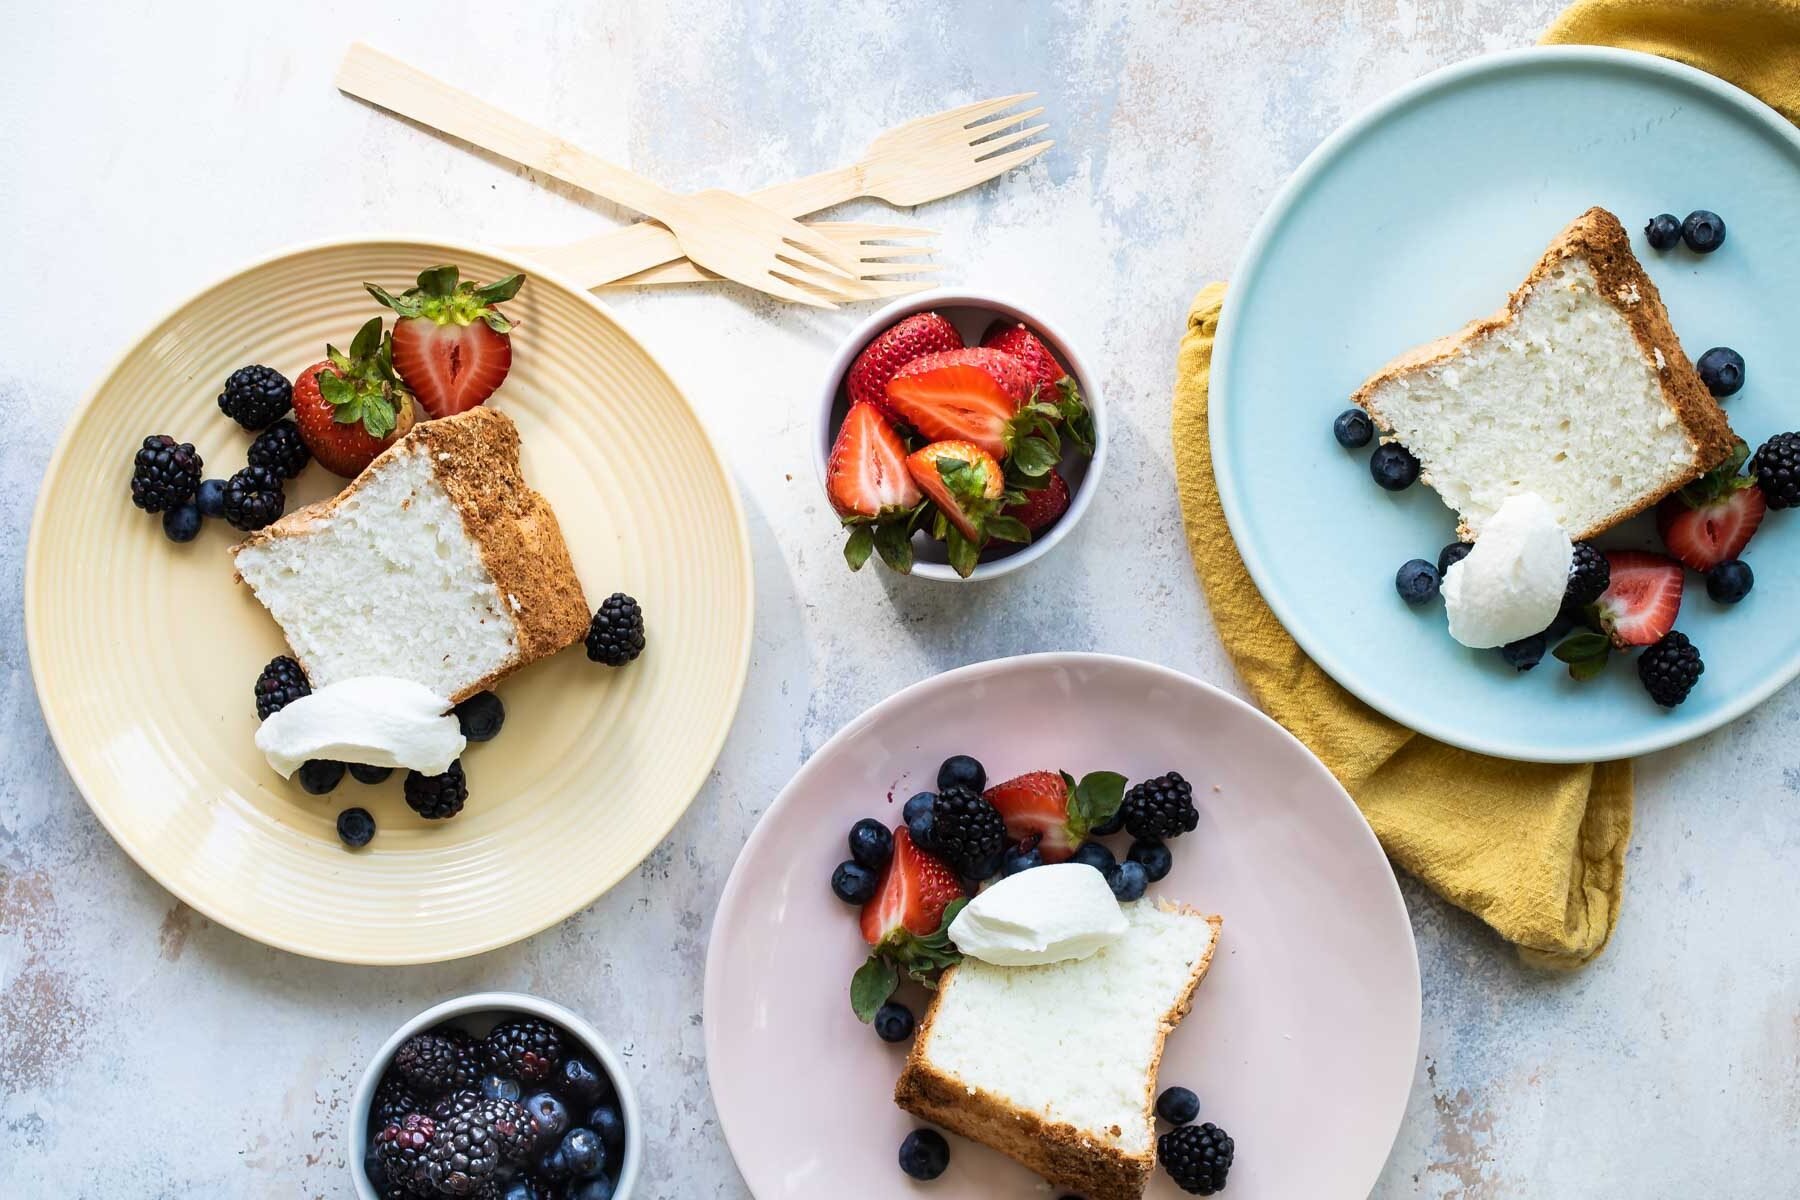 Slices of angel food cake with fresh berries and whipped cream.